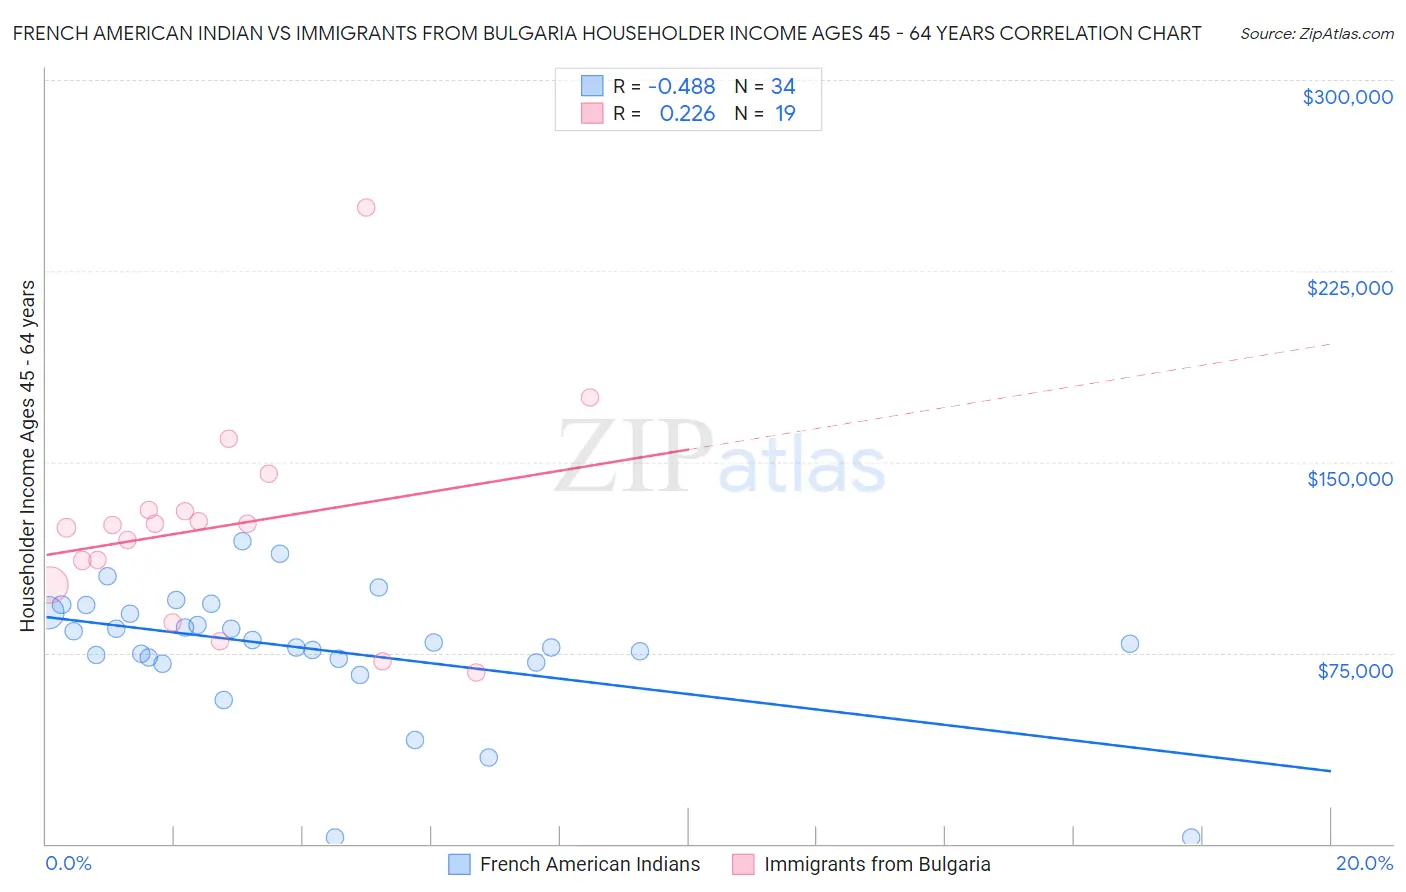 French American Indian vs Immigrants from Bulgaria Householder Income Ages 45 - 64 years